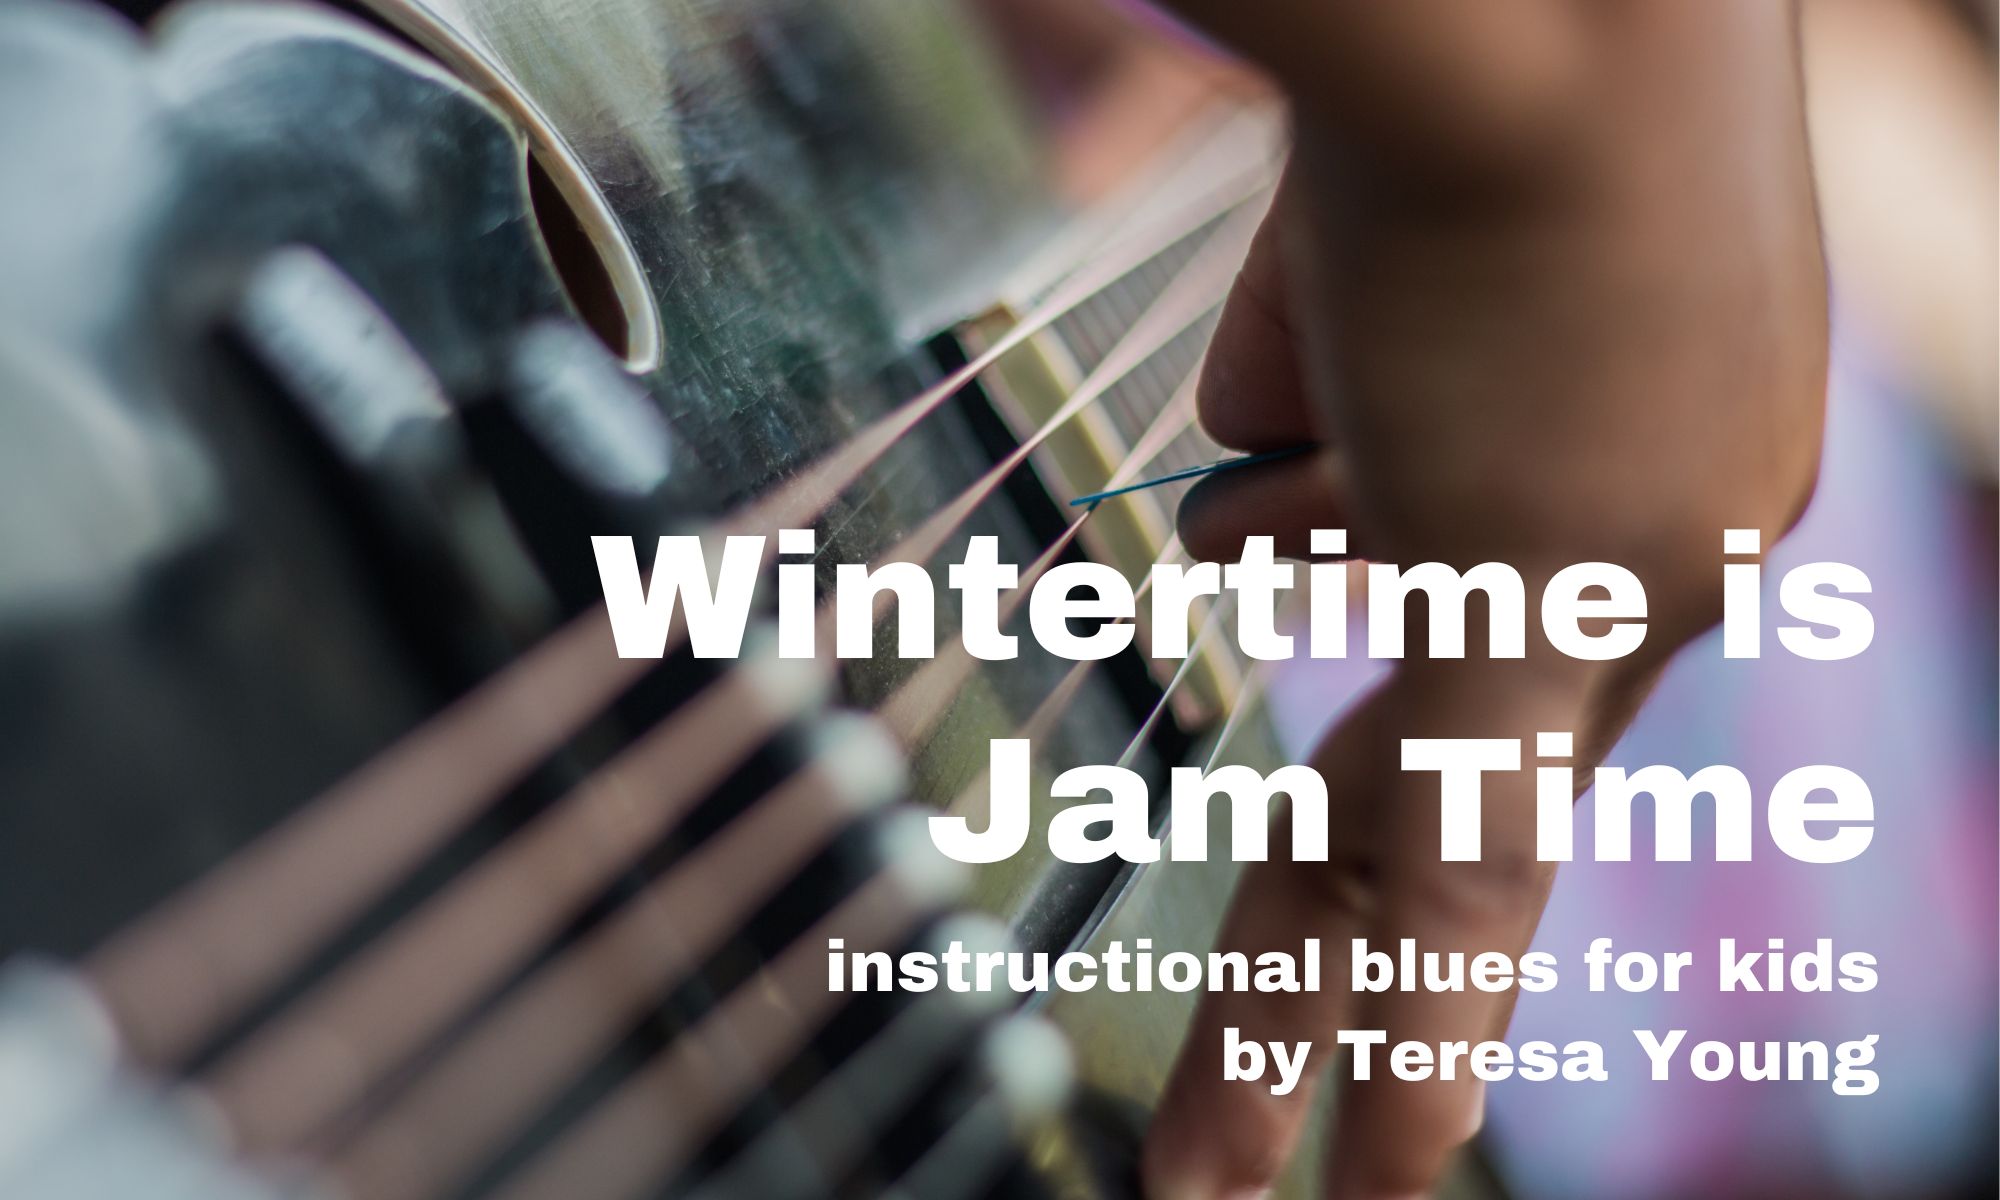 Wintertime is Jam Time by Teresa Young